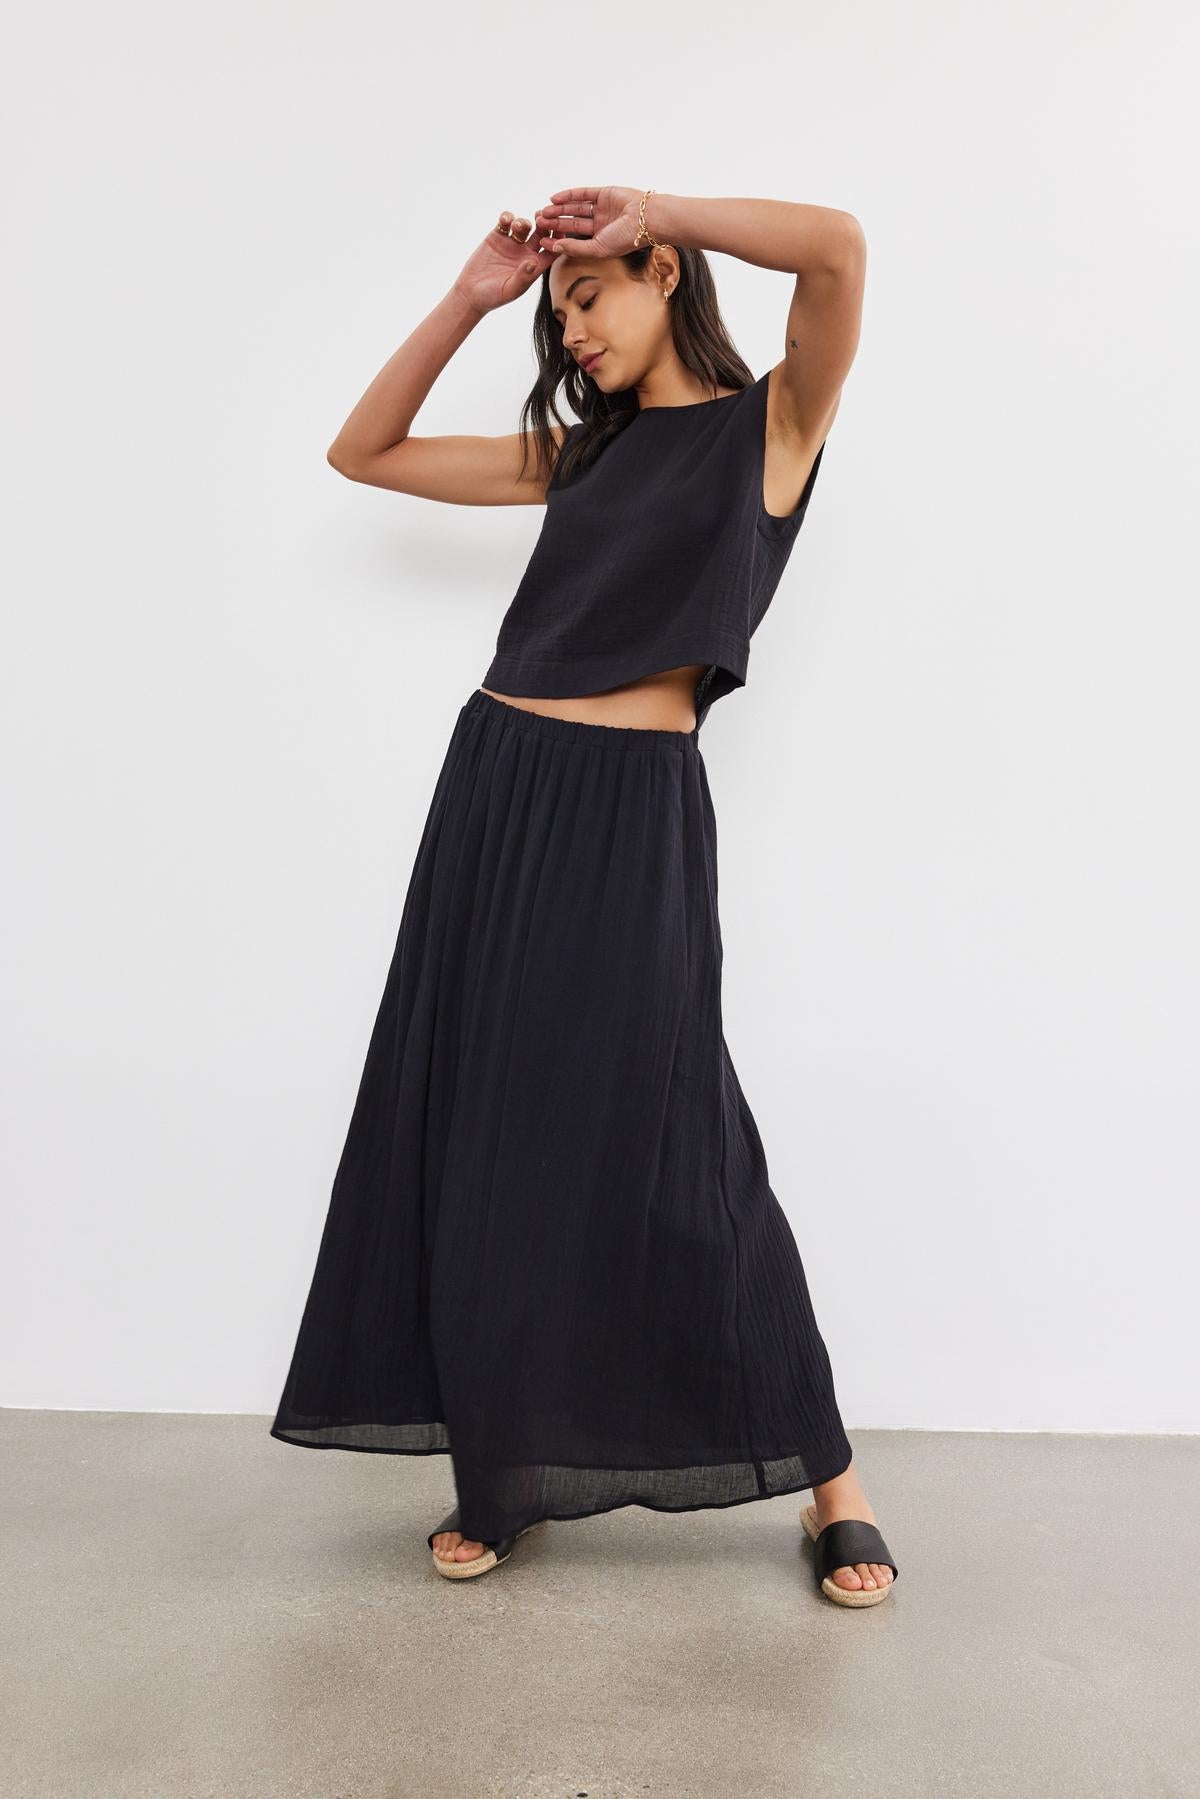 A woman in a black crop top and the Velvet by Graham & Spencer INDY COTTON GAUZE SKIRT poses in a studio, one hand raised to her forehead, looking downwards.-36910124138689